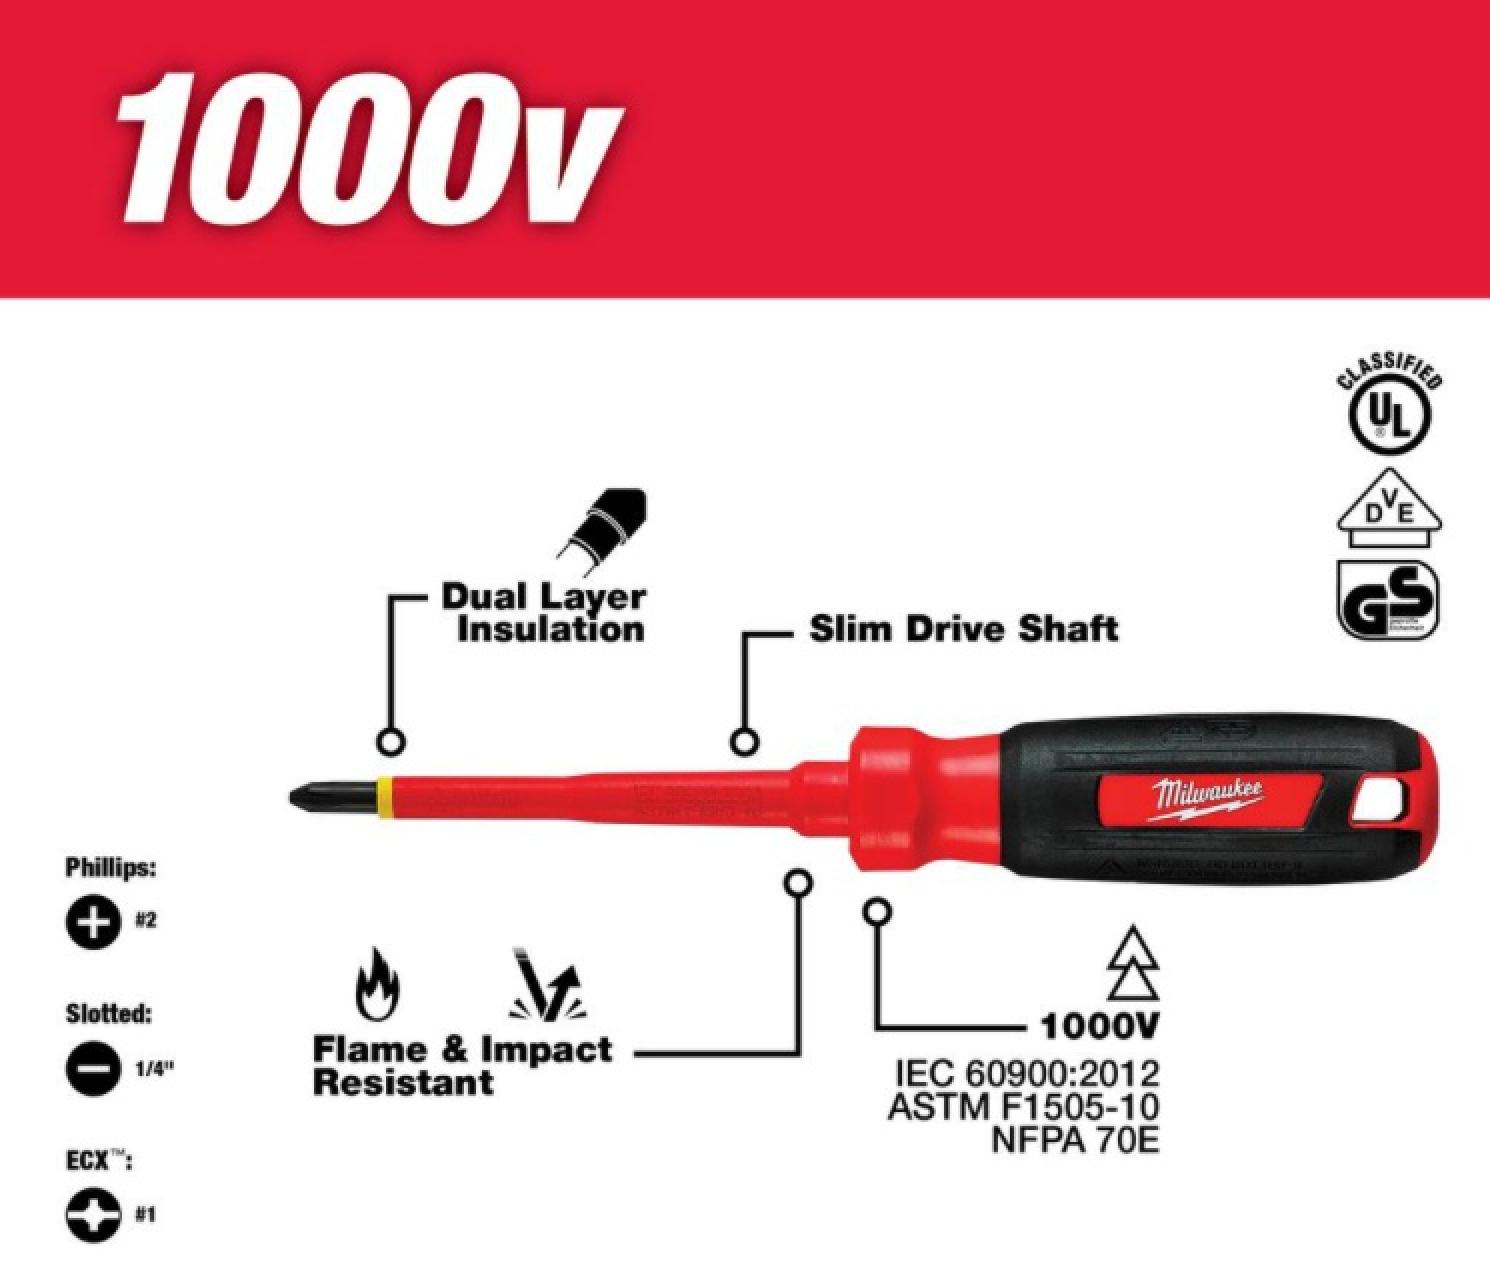 Milwaukee 1000V Insulated Screwdriver Set specifications